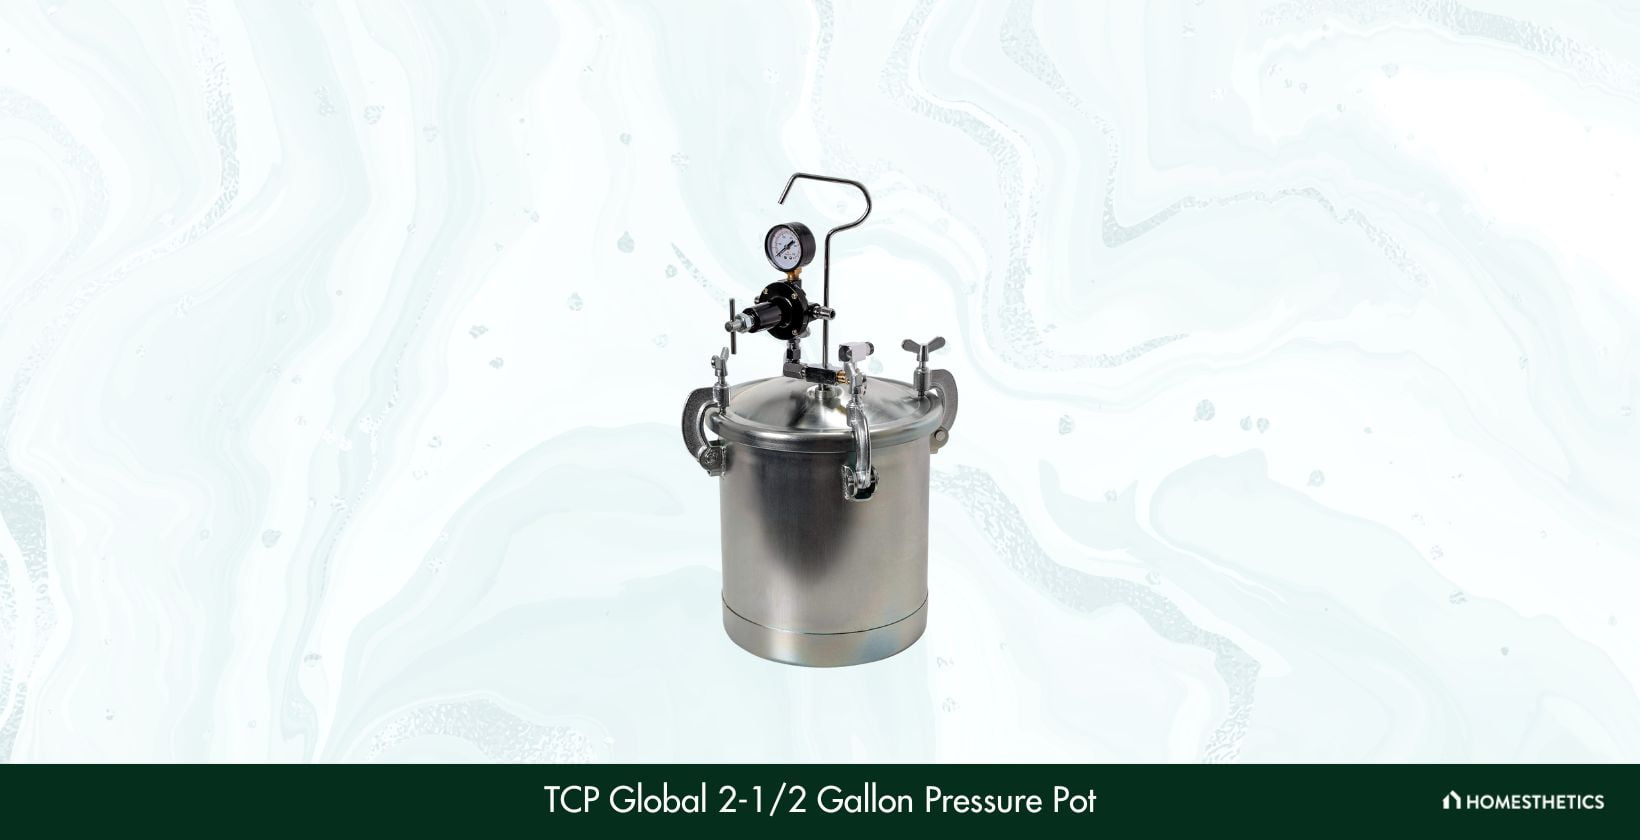 5 Best Pressure Pot For Resin Casting Right Now